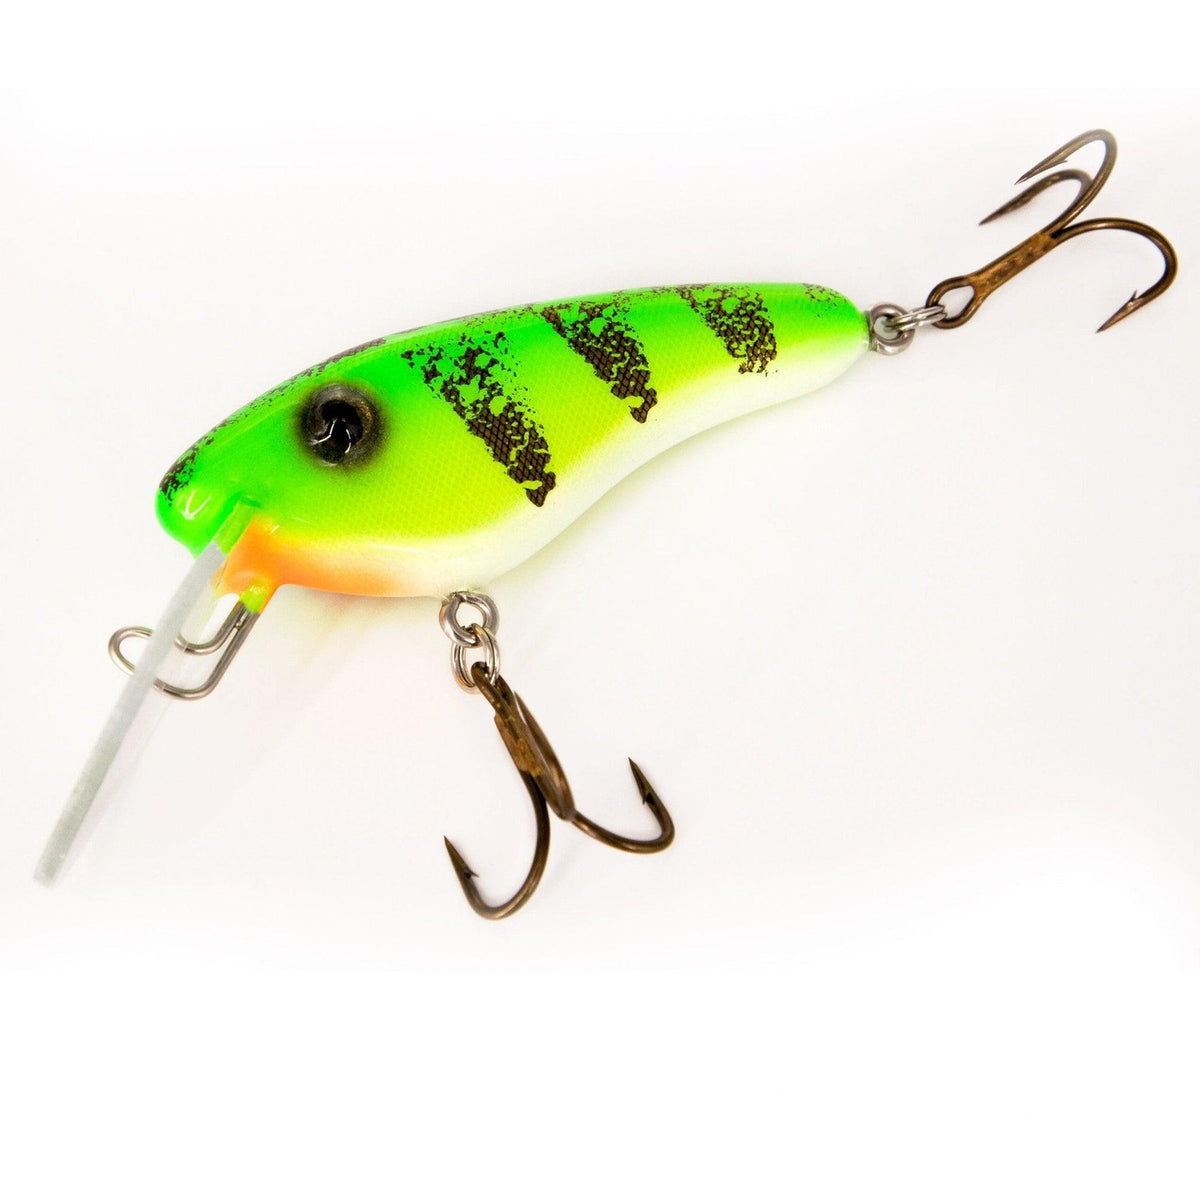 View of Crankbaits Llungen Lures Stray Cat Crankbait Brushed Perch available at EZOKO Pike and Musky Shop